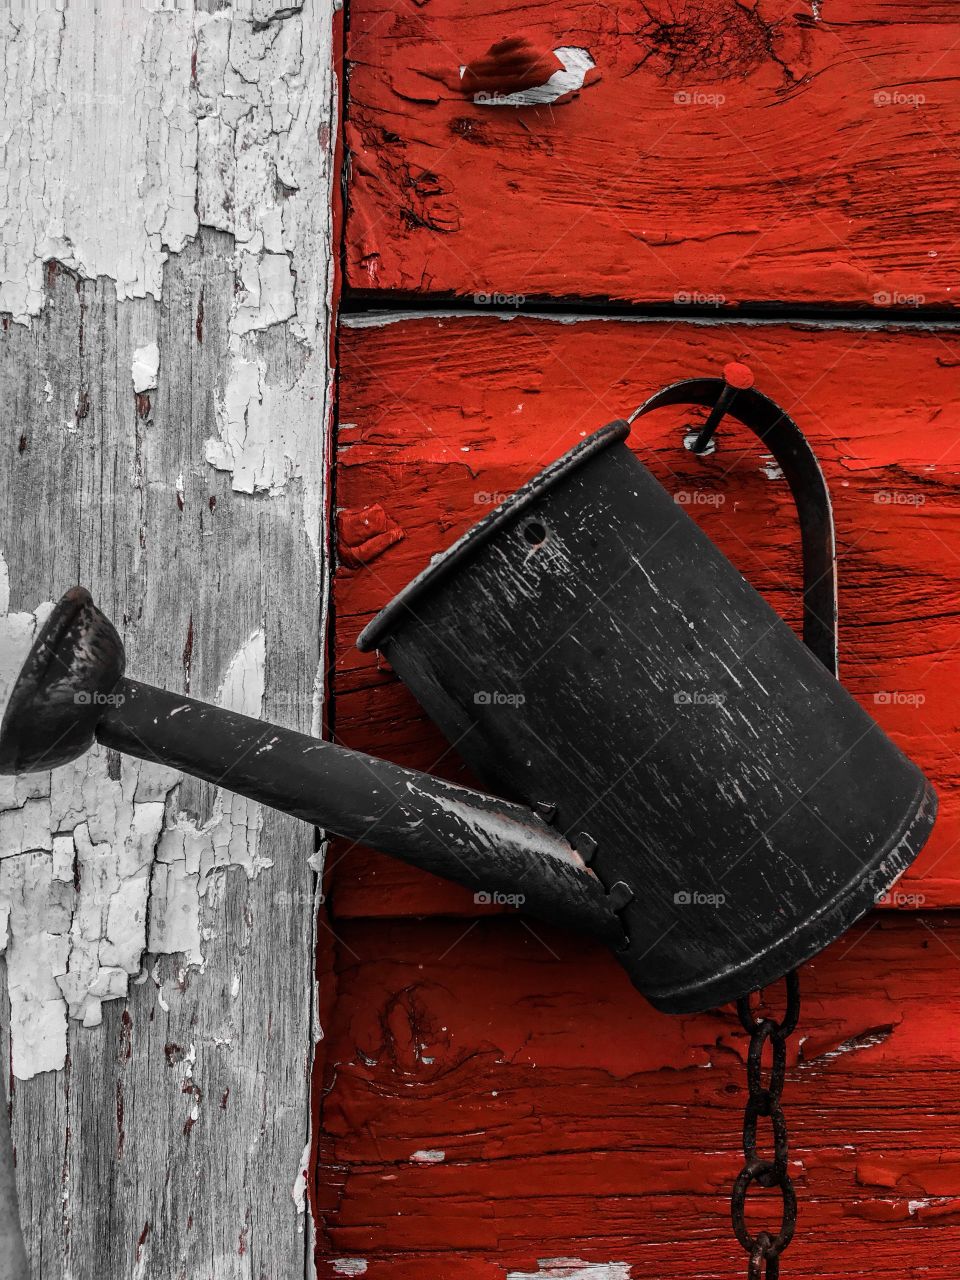 A rusty watering can on a flaking barn.